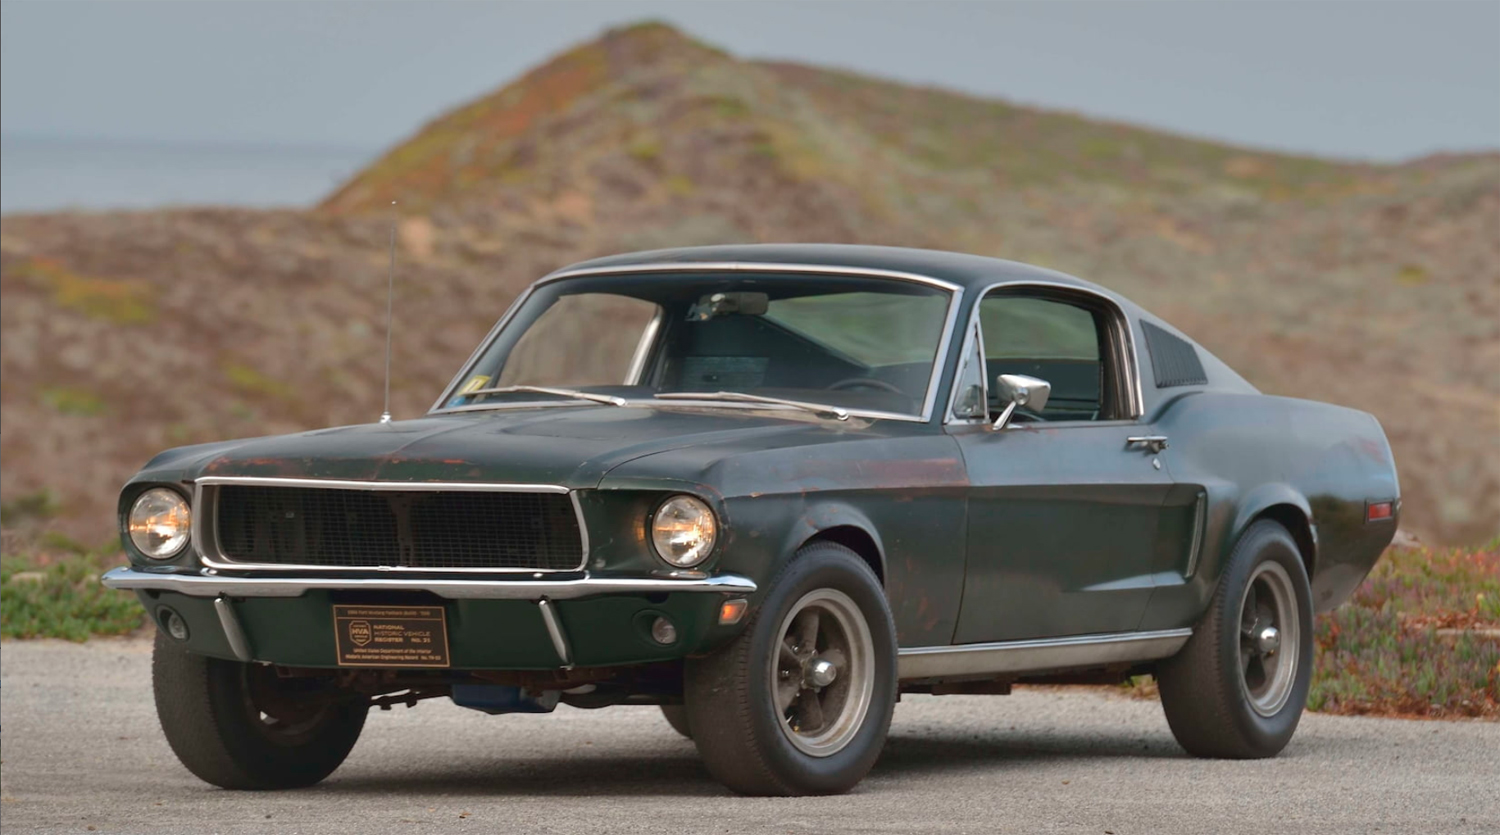 The Real 1968 Ford Mustang Bullitt Estimated To Sell For $3.5 Million